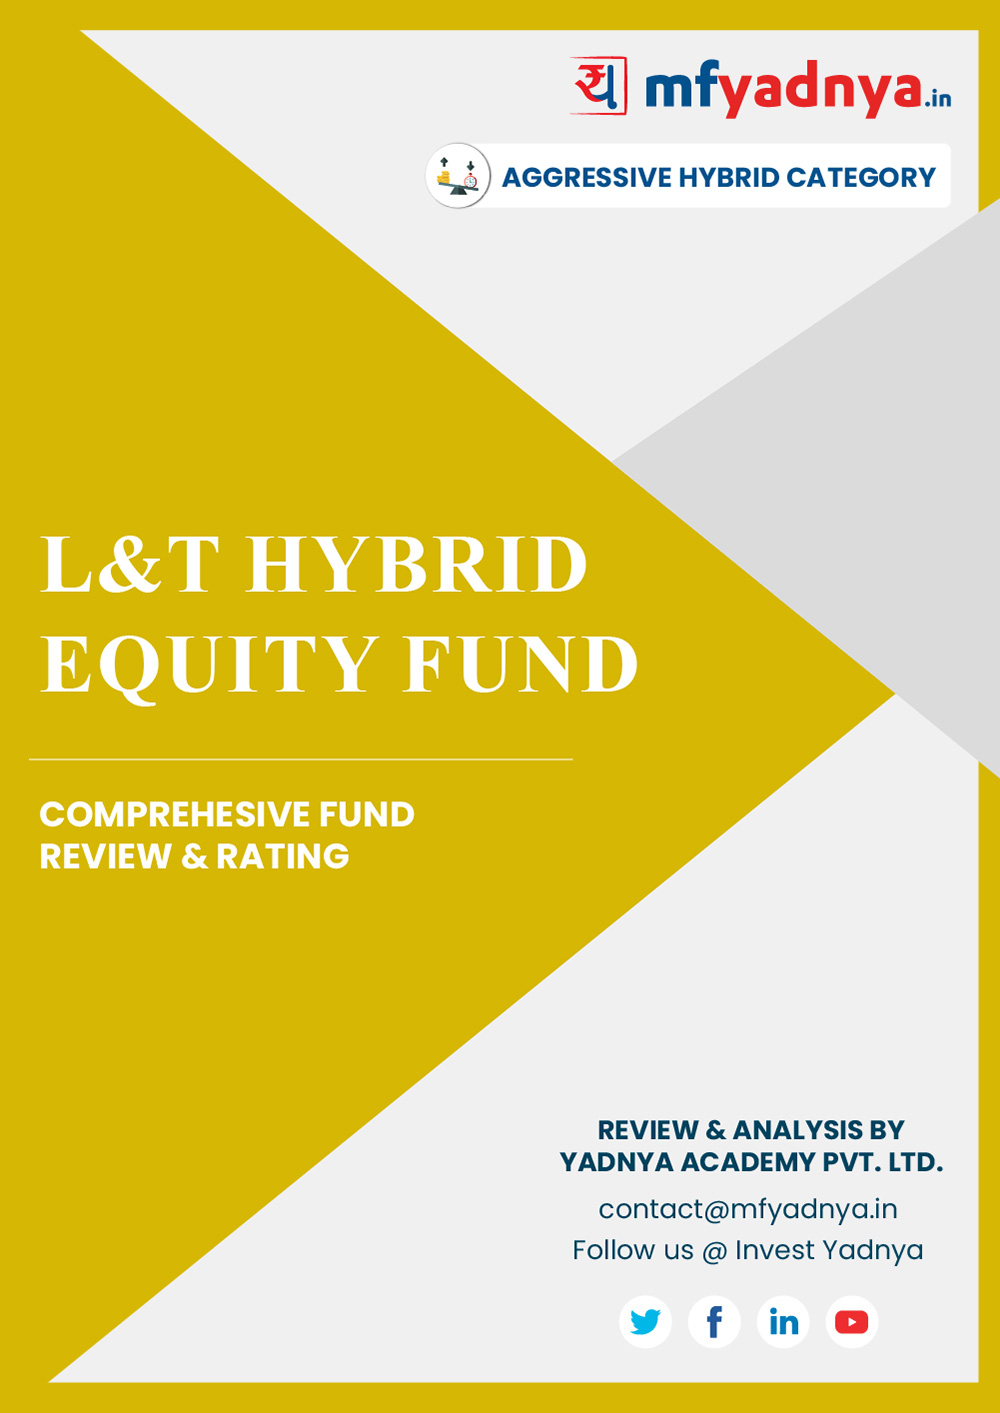 This e-book offers a comprehensive mutual fund review of L&T Equity Advantage Fund for hybrid category. It reviews the fund's return, ratio, allocation etc. ✔ Detailed Mutual Fund Analysis ✔ Latest Research Reports